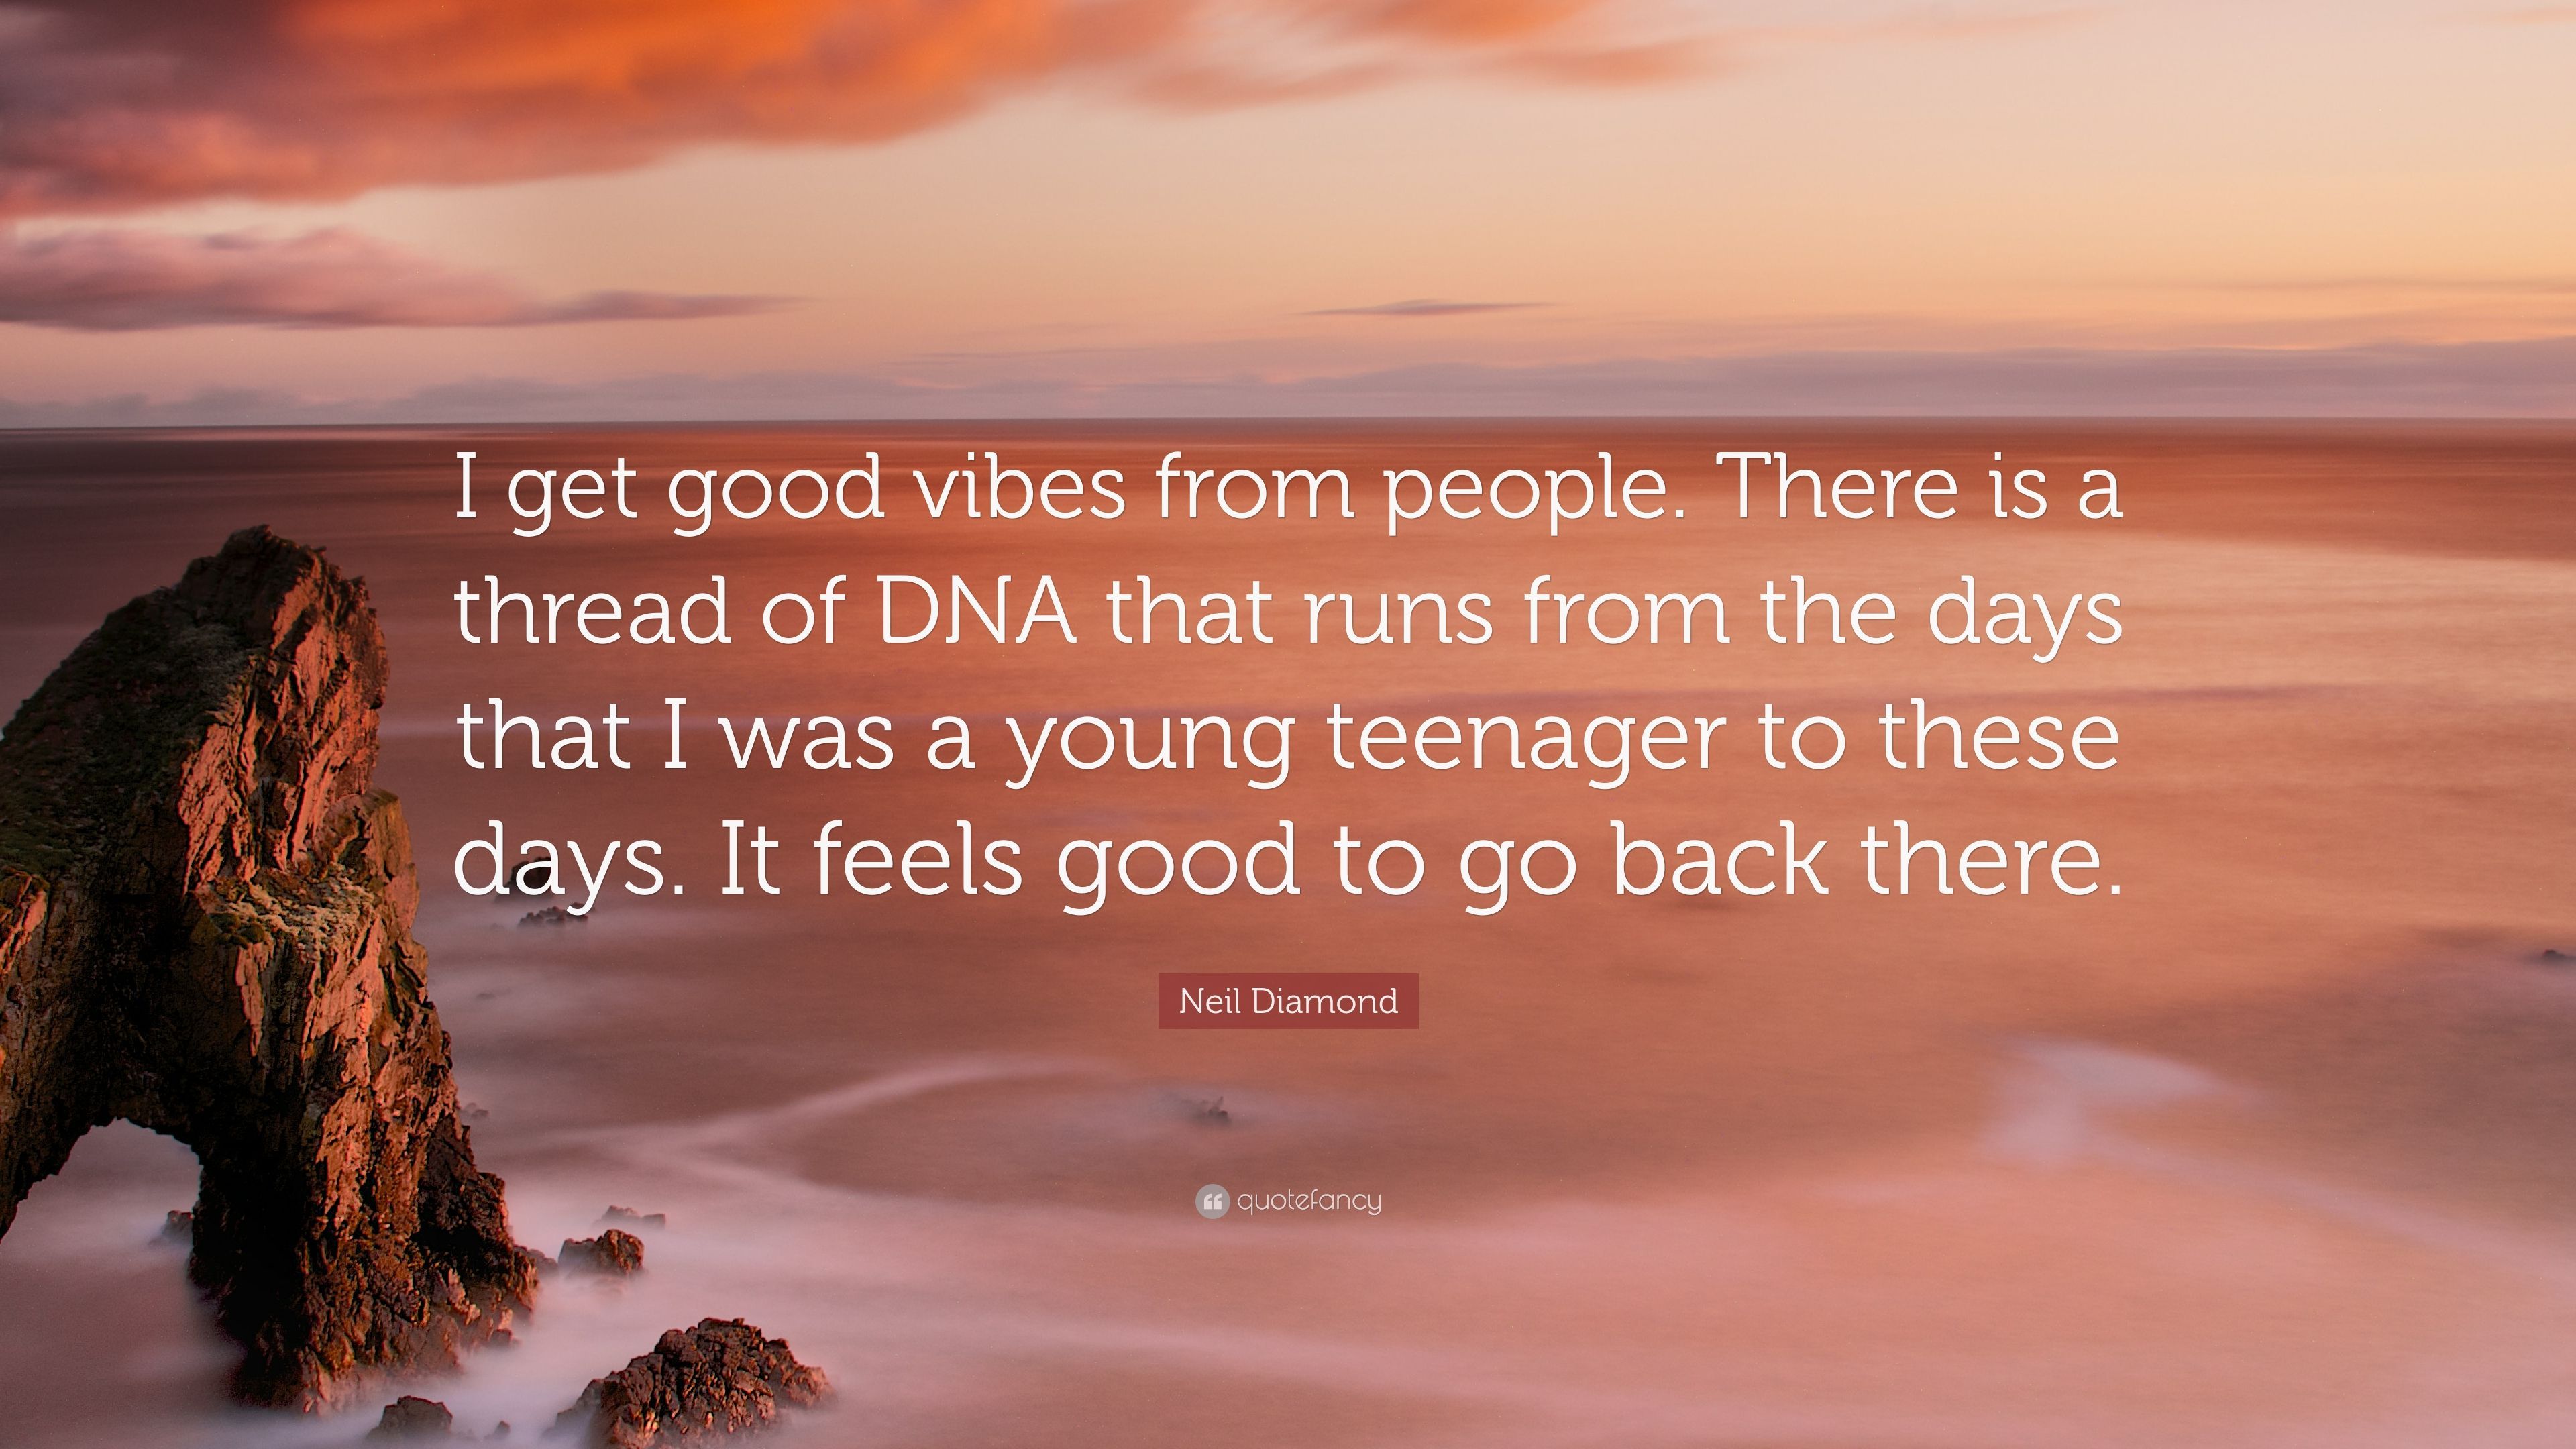 Neil Diamond Quote: “I get good vibes from people. There is a thread of DNA that runs from the days that I was a young teenager to these days.” (7 wallpaper)